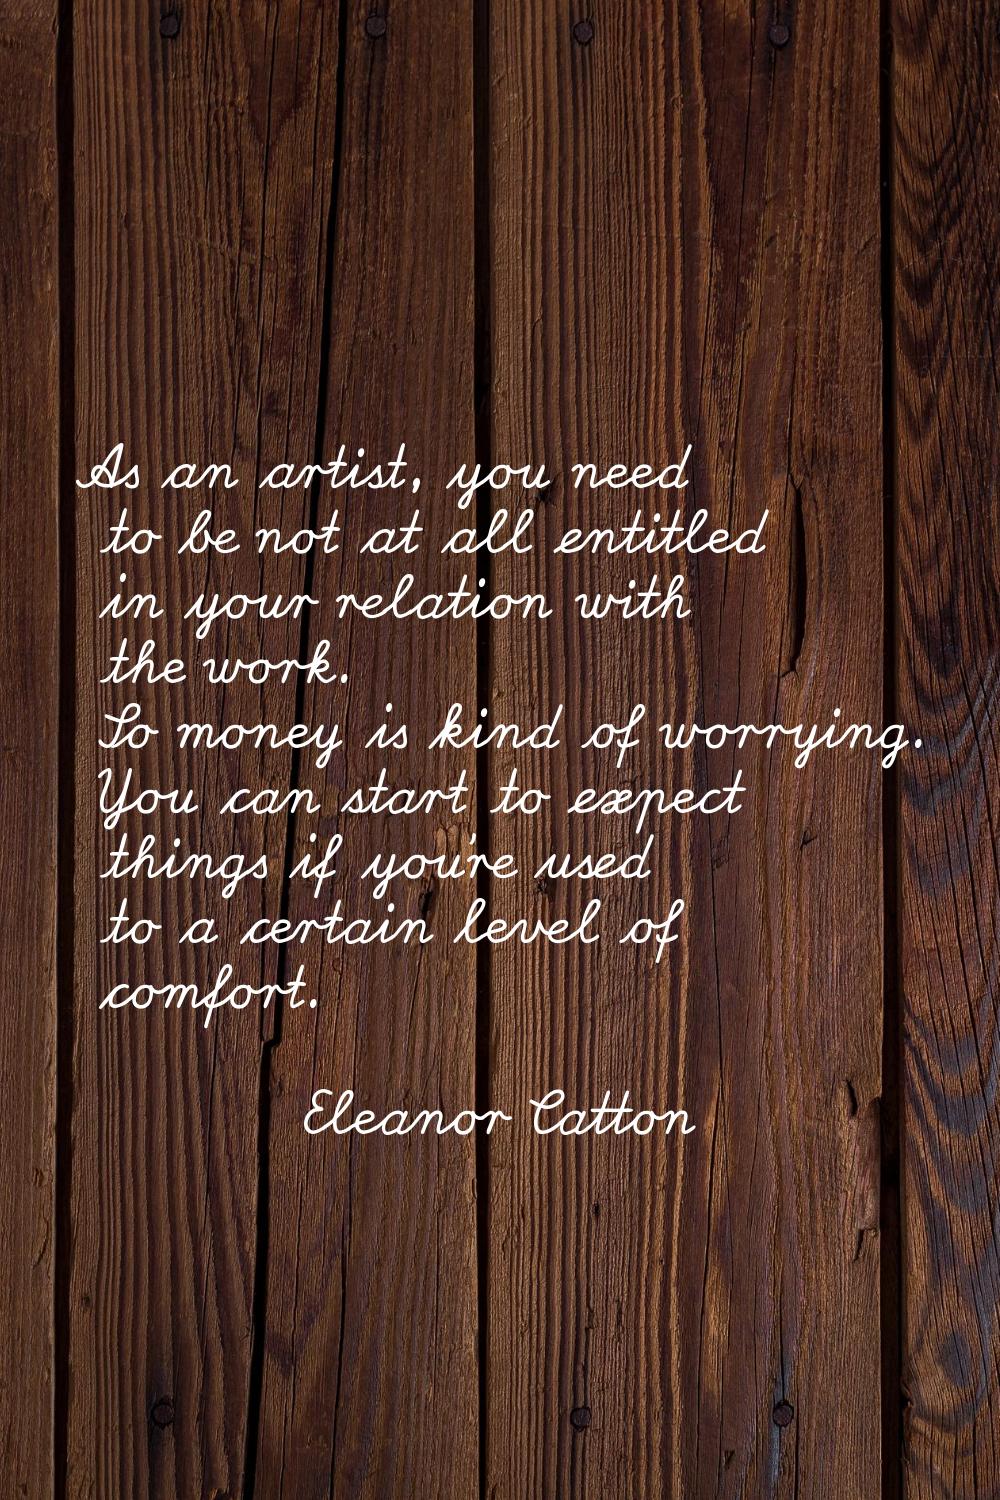 As an artist, you need to be not at all entitled in your relation with the work. So money is kind o